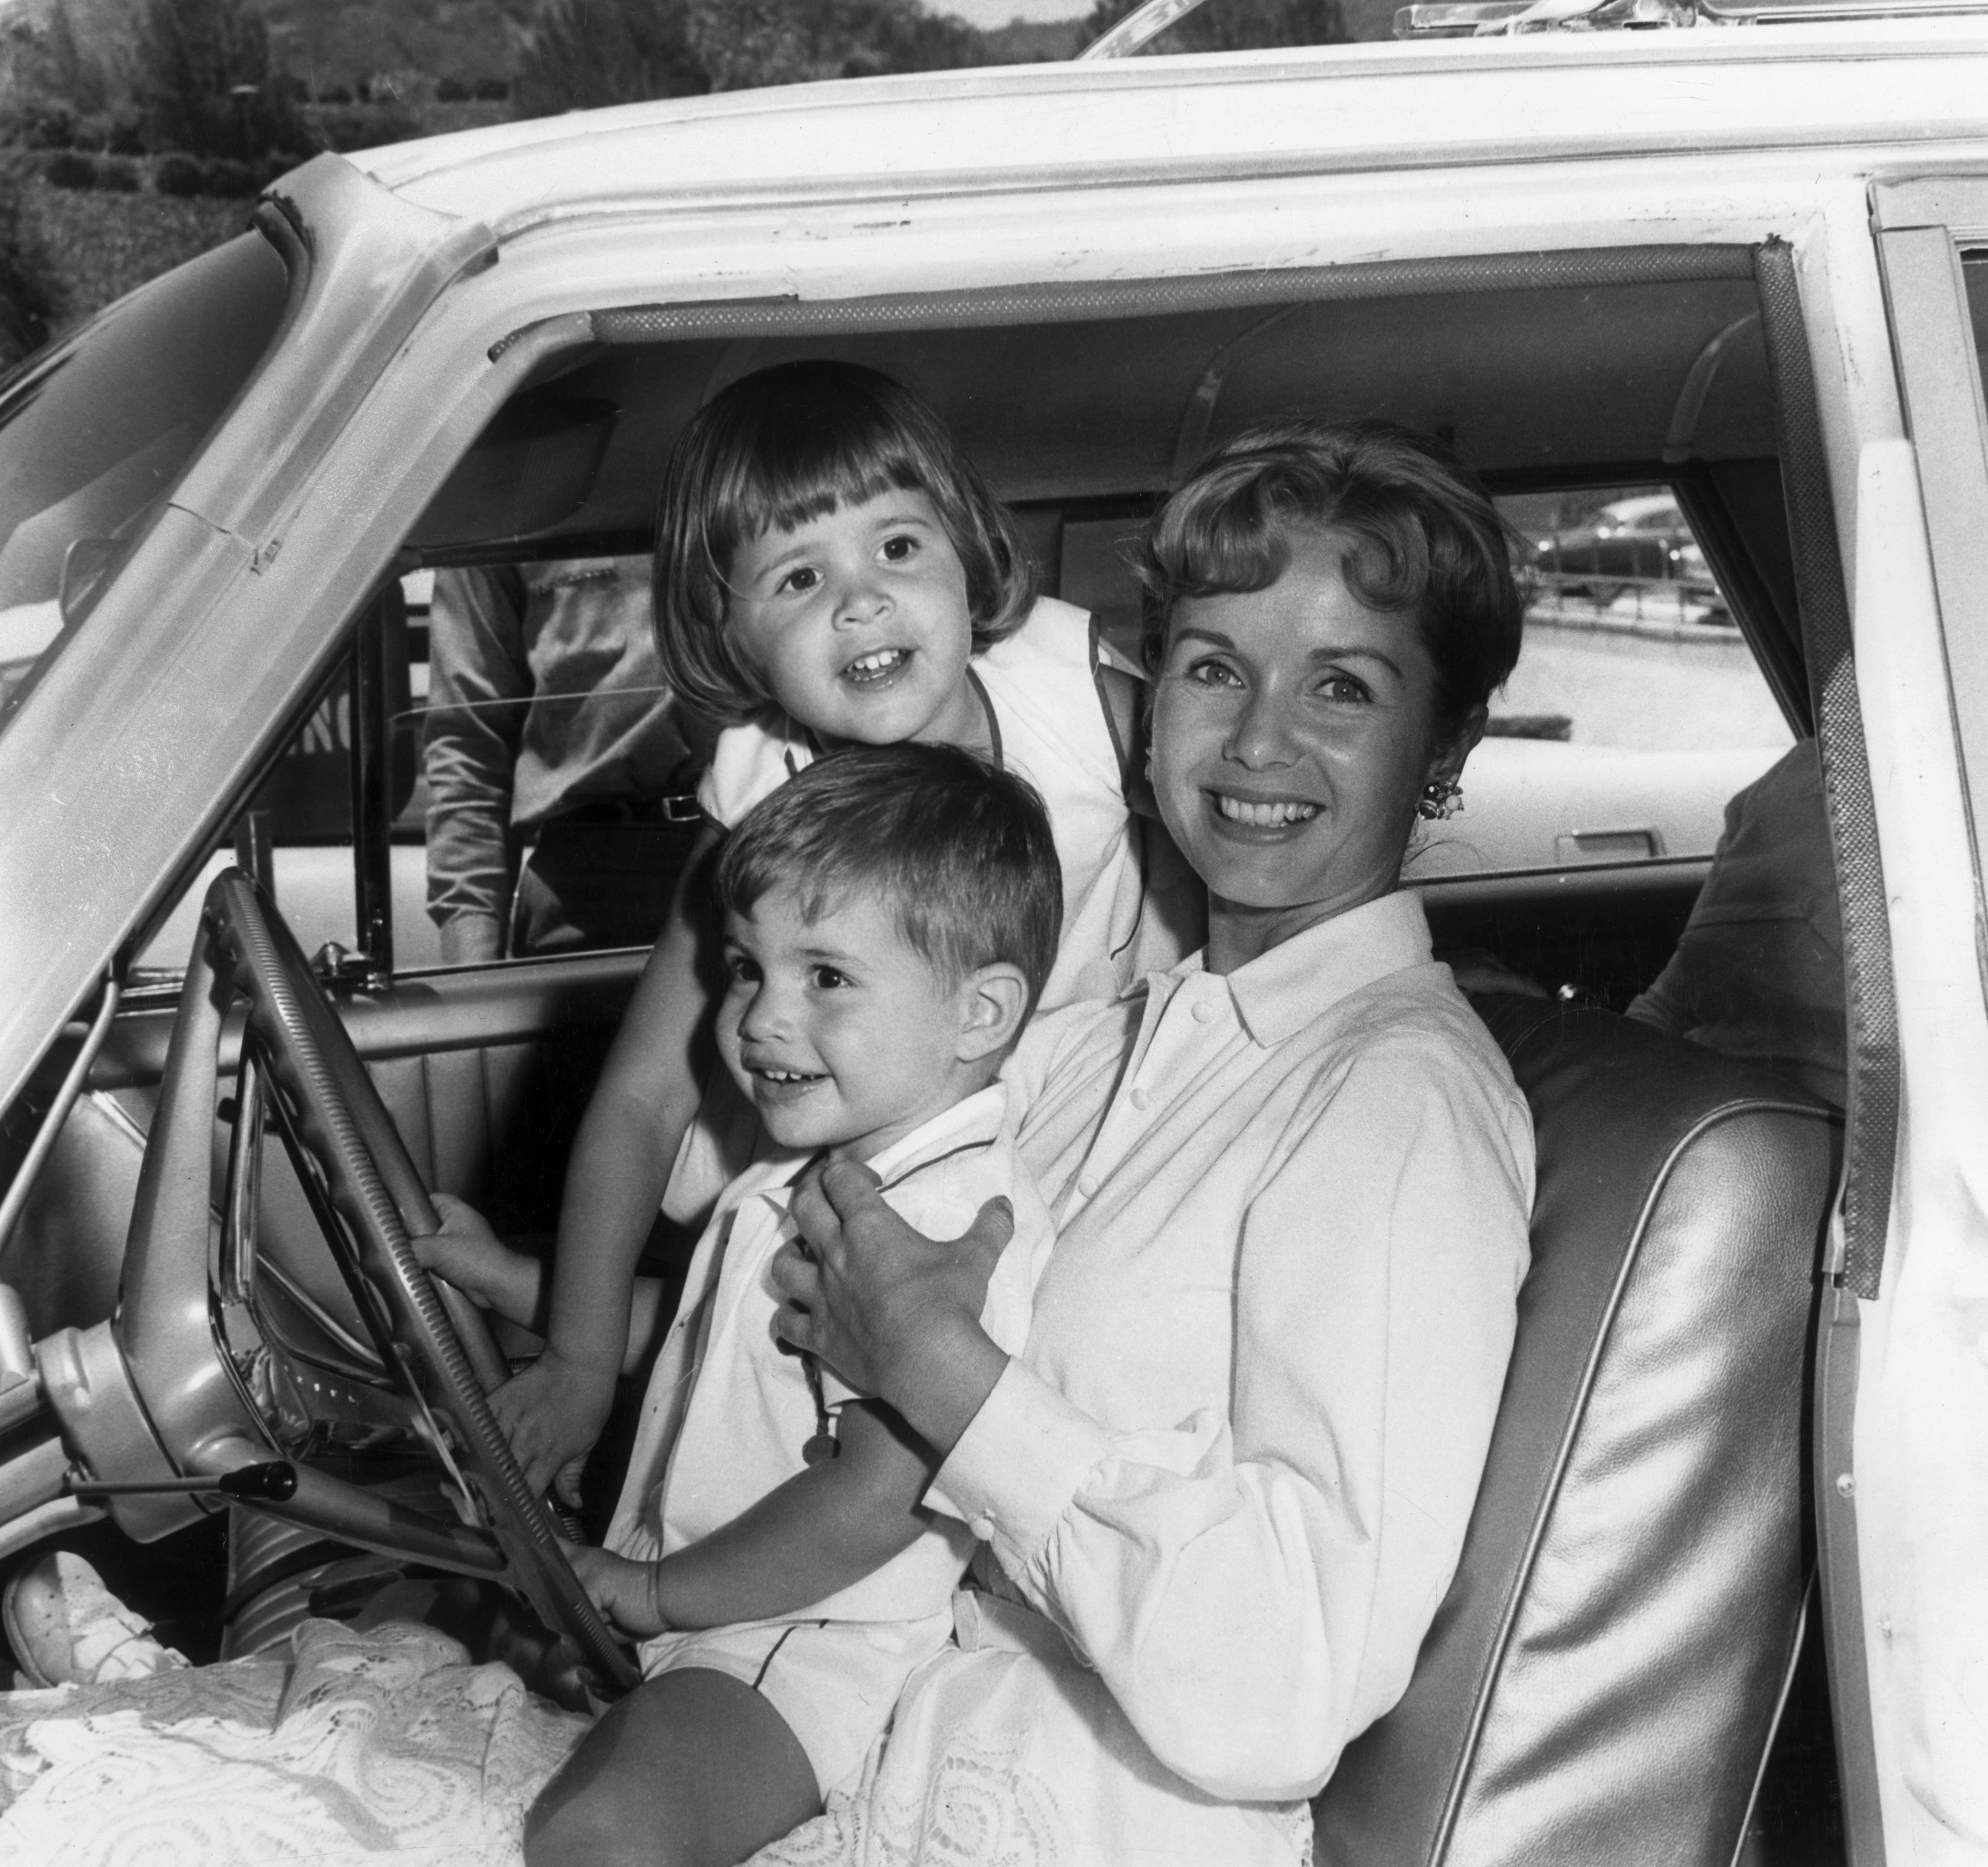 Debbie Reynolds photographed with her children Todd and Carrie Fisher on June 25, 1960 in Hollywood, California ┃Source: Getty Images